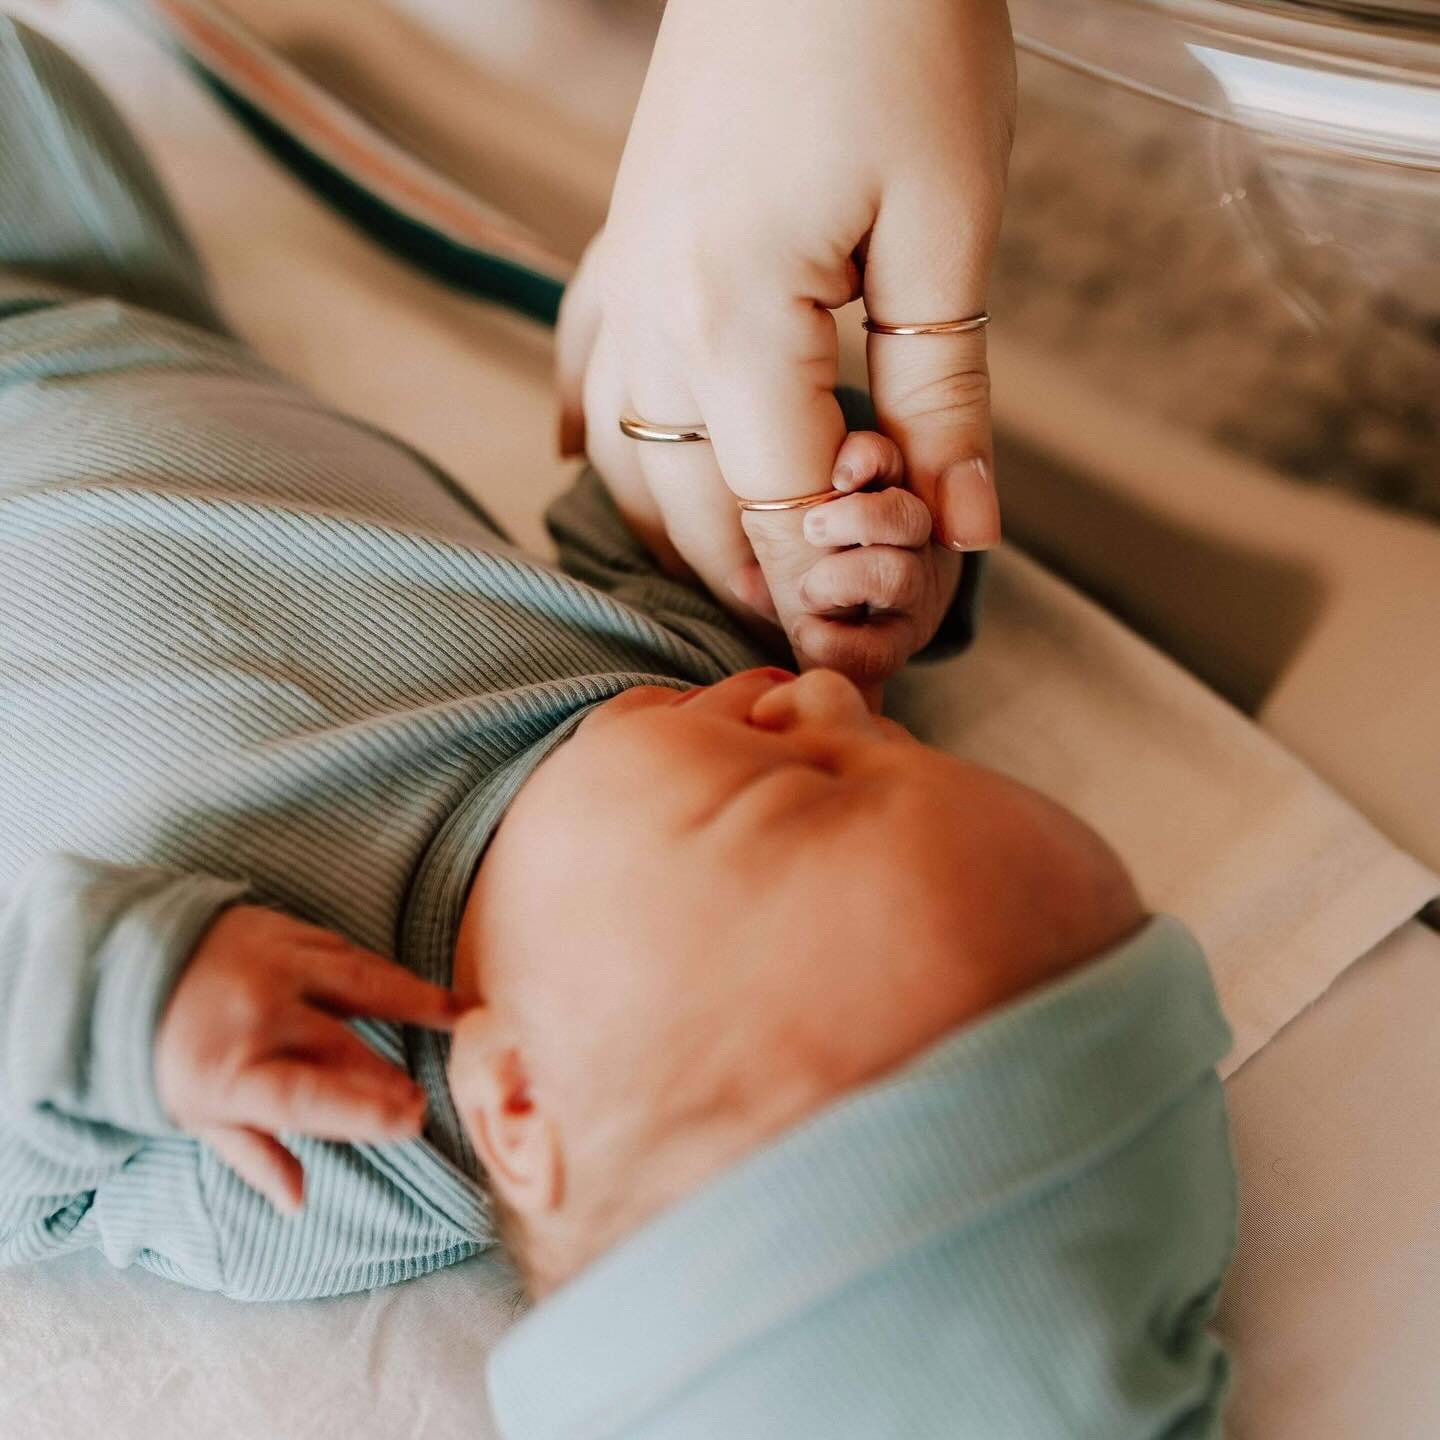 Opinionated post ahead. I think moms should not have ANY visitors in the hospital after deliver. It&rsquo;s too much for new moms to have visitors in the hospital after delivery. Between the pain, feedings, sleepiness, doctors and nurses coming in an